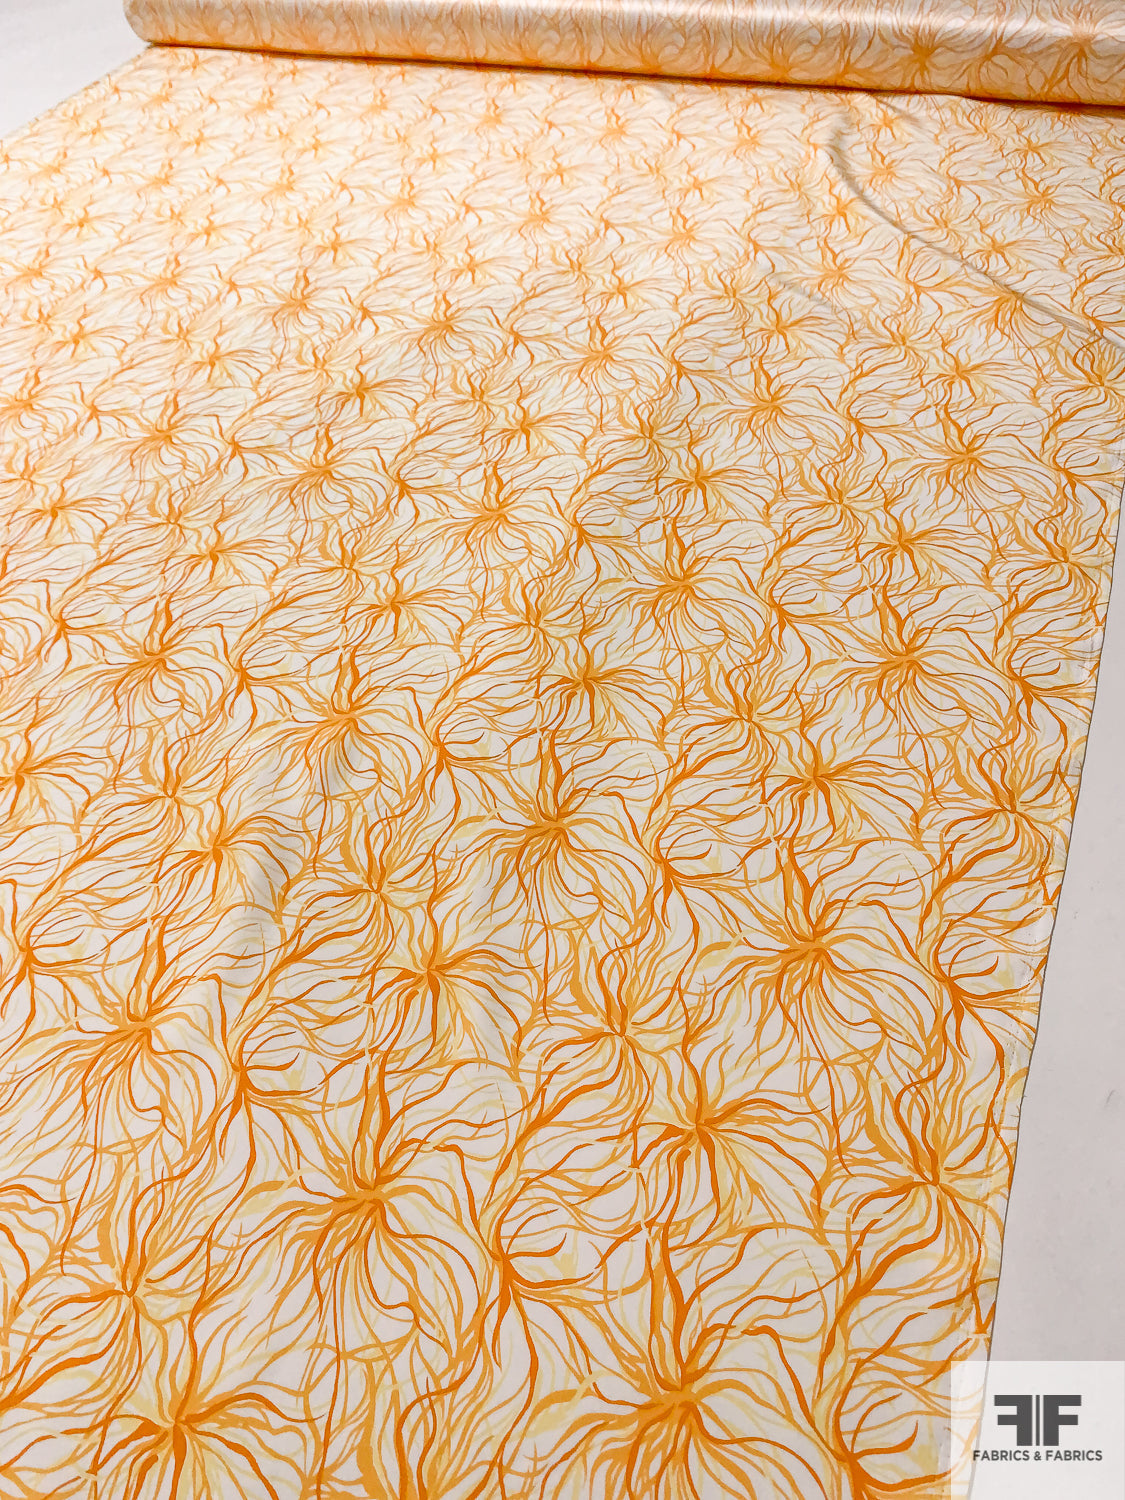 Tentacle Floral Matte-Side Printed Silk Charmeuse - Tangerine / Orange / Yellow / Off-White